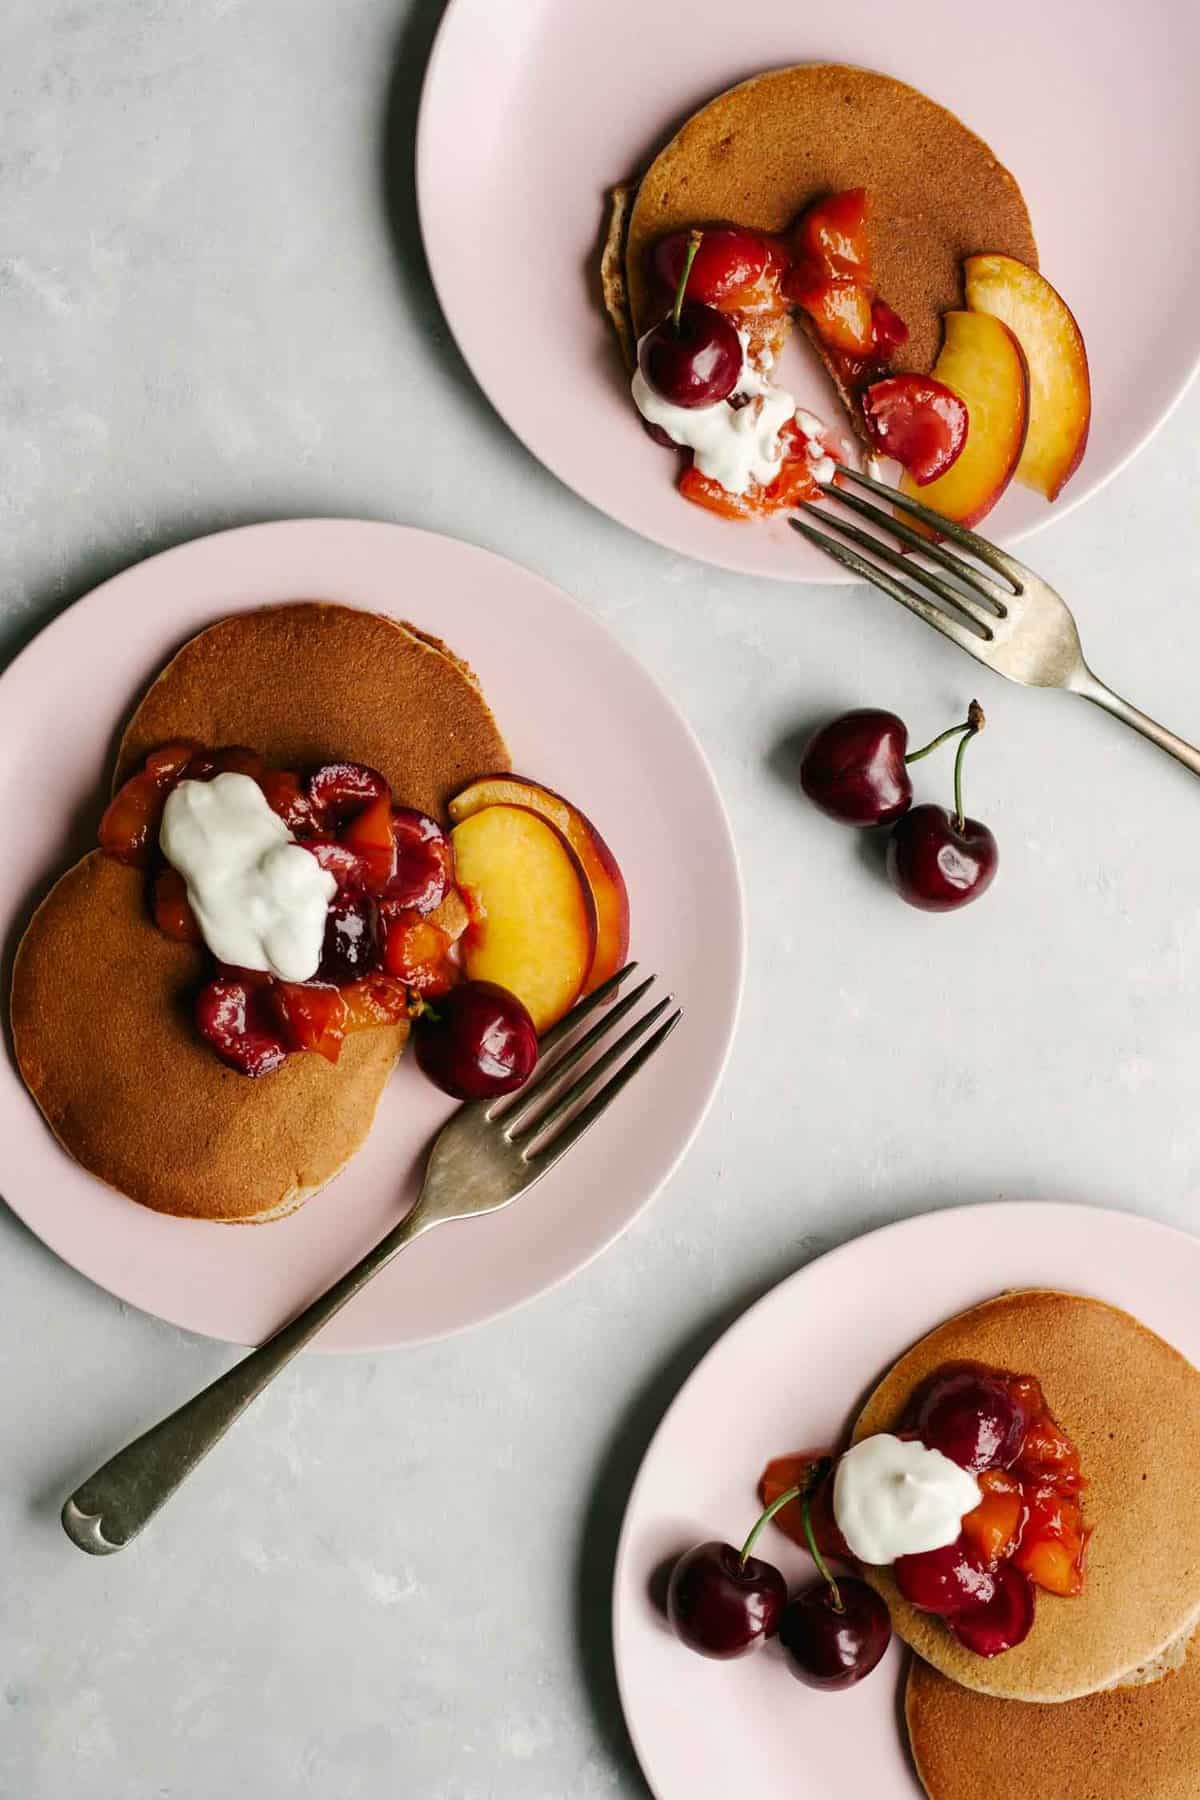 Plates with Almond butter pancakes and compote and forks.